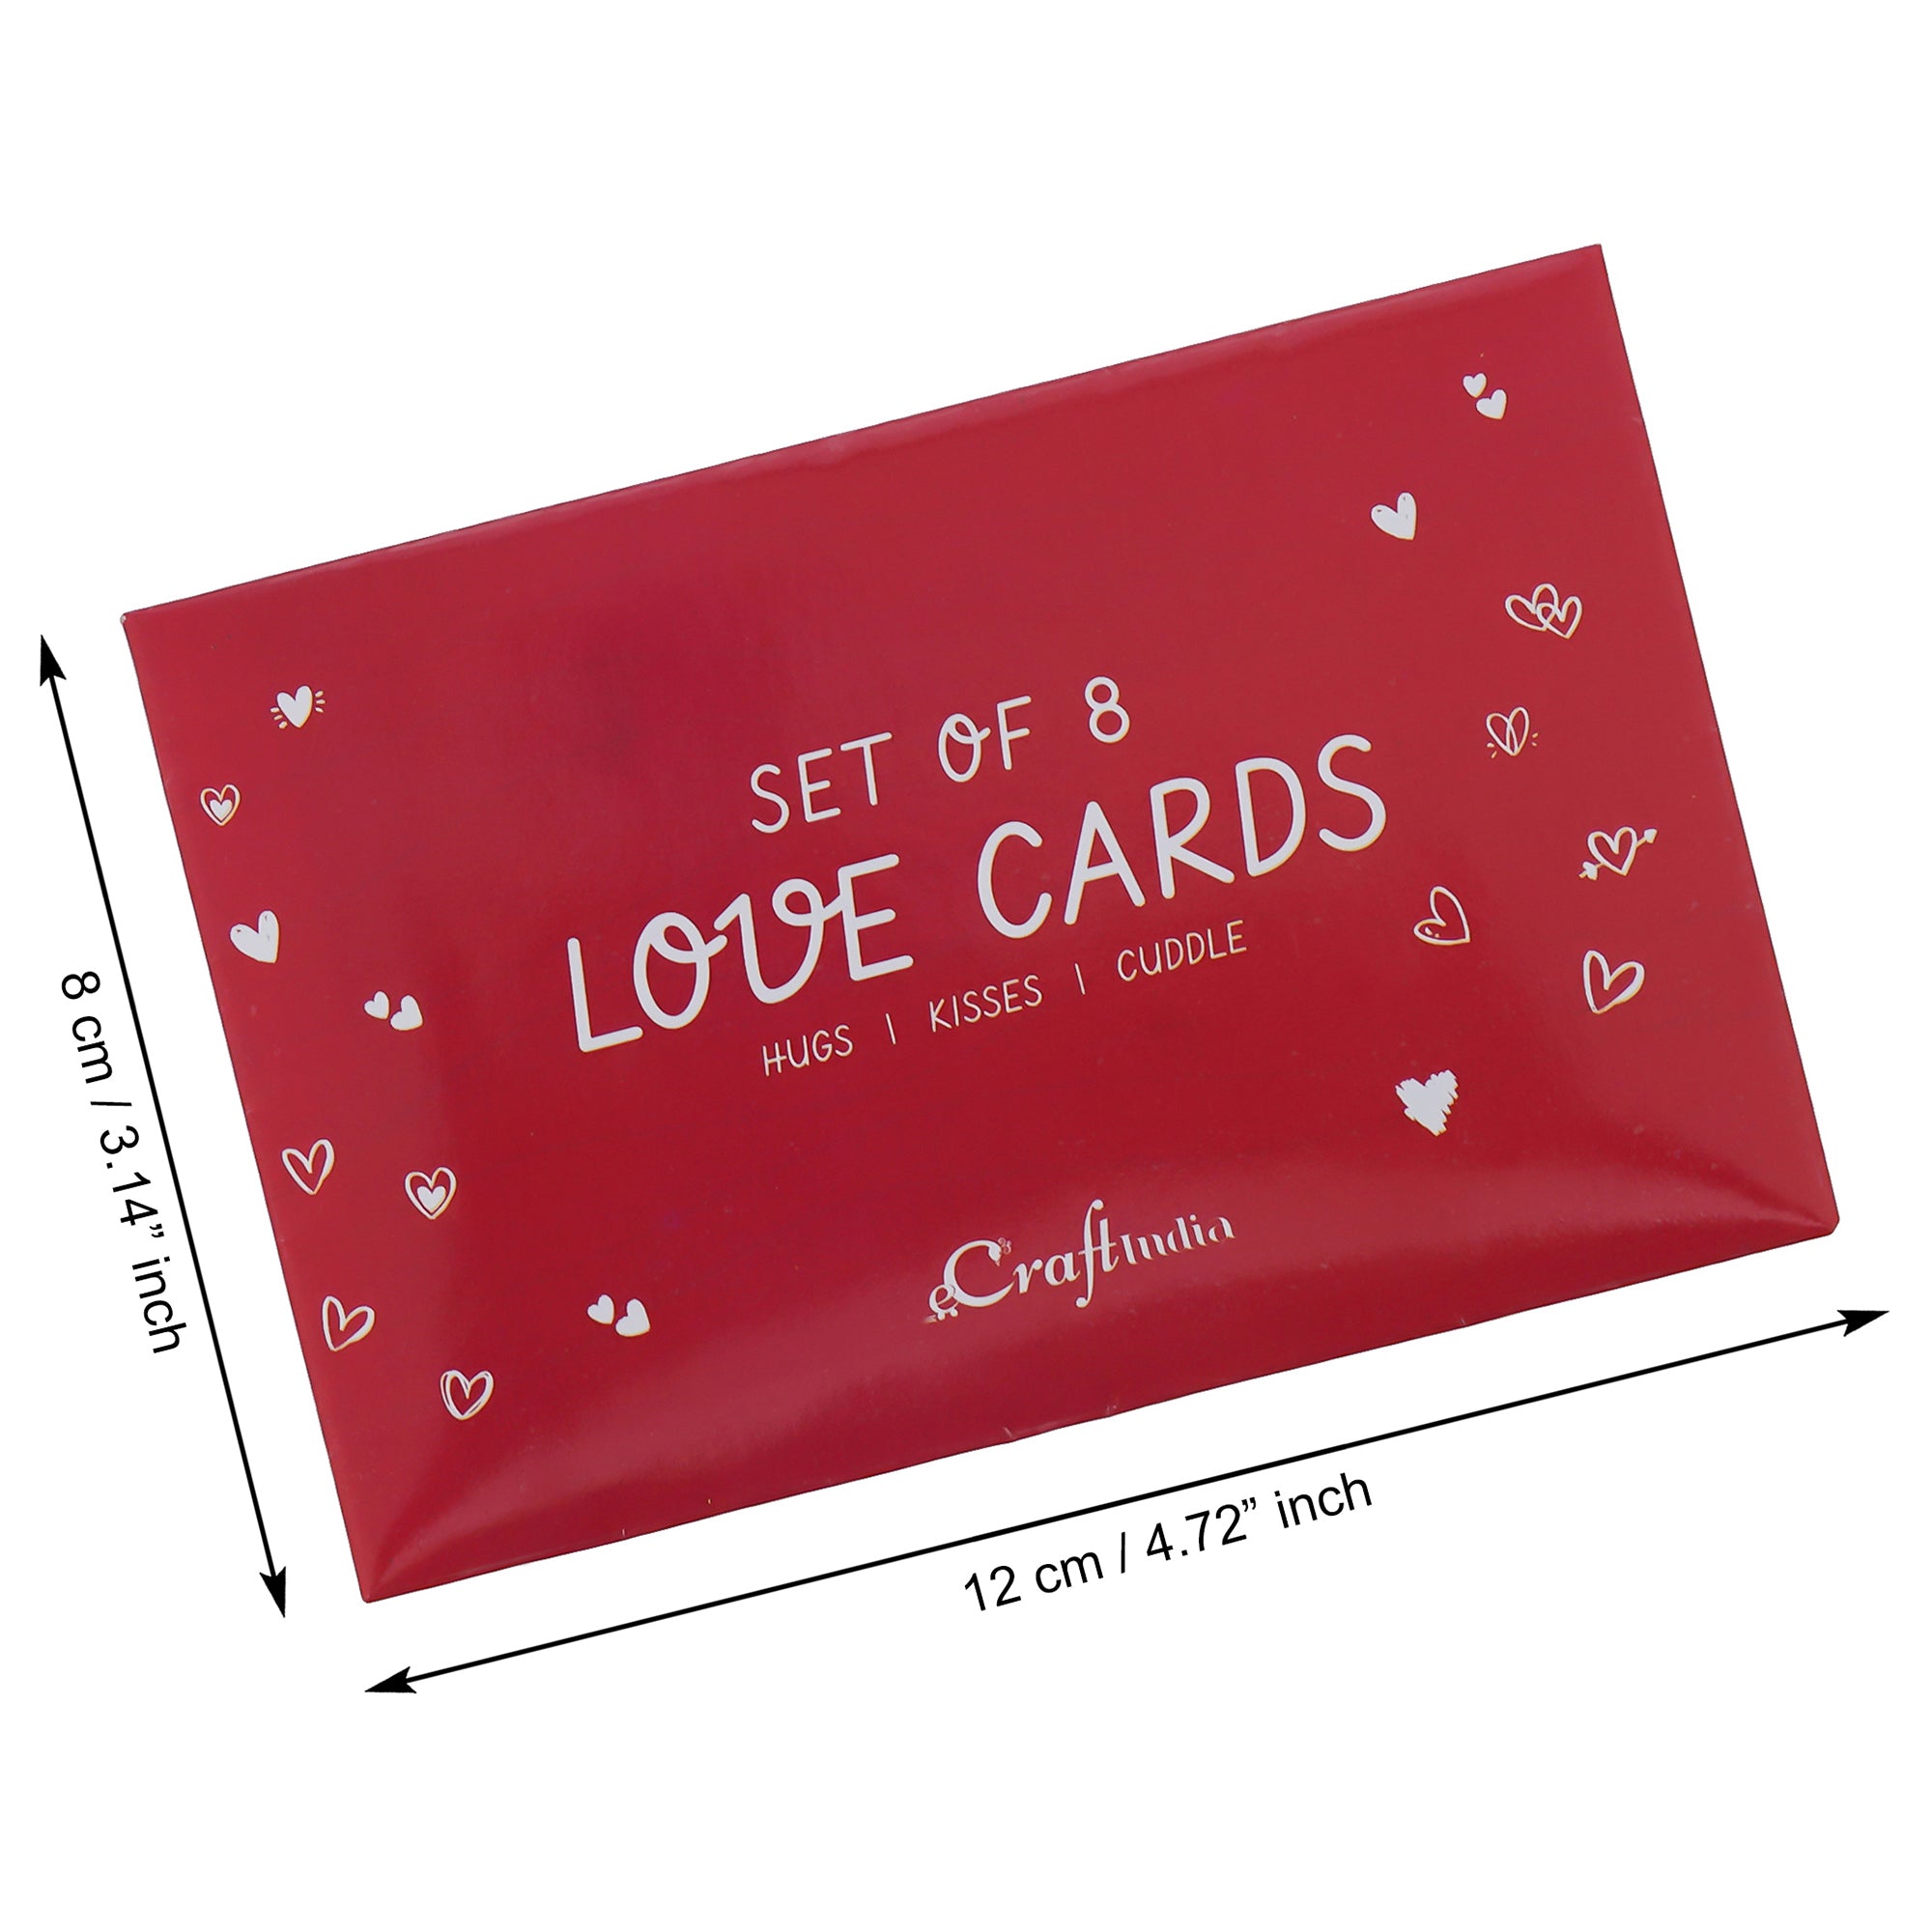 Valentine Combo of Pack of 8 Love Gift Cards, "Love" Animated Characters Showpiece, Red Roses Bouquet and White, Red Teddy Bear Valentine's Rectangle Shaped Gift Box 2